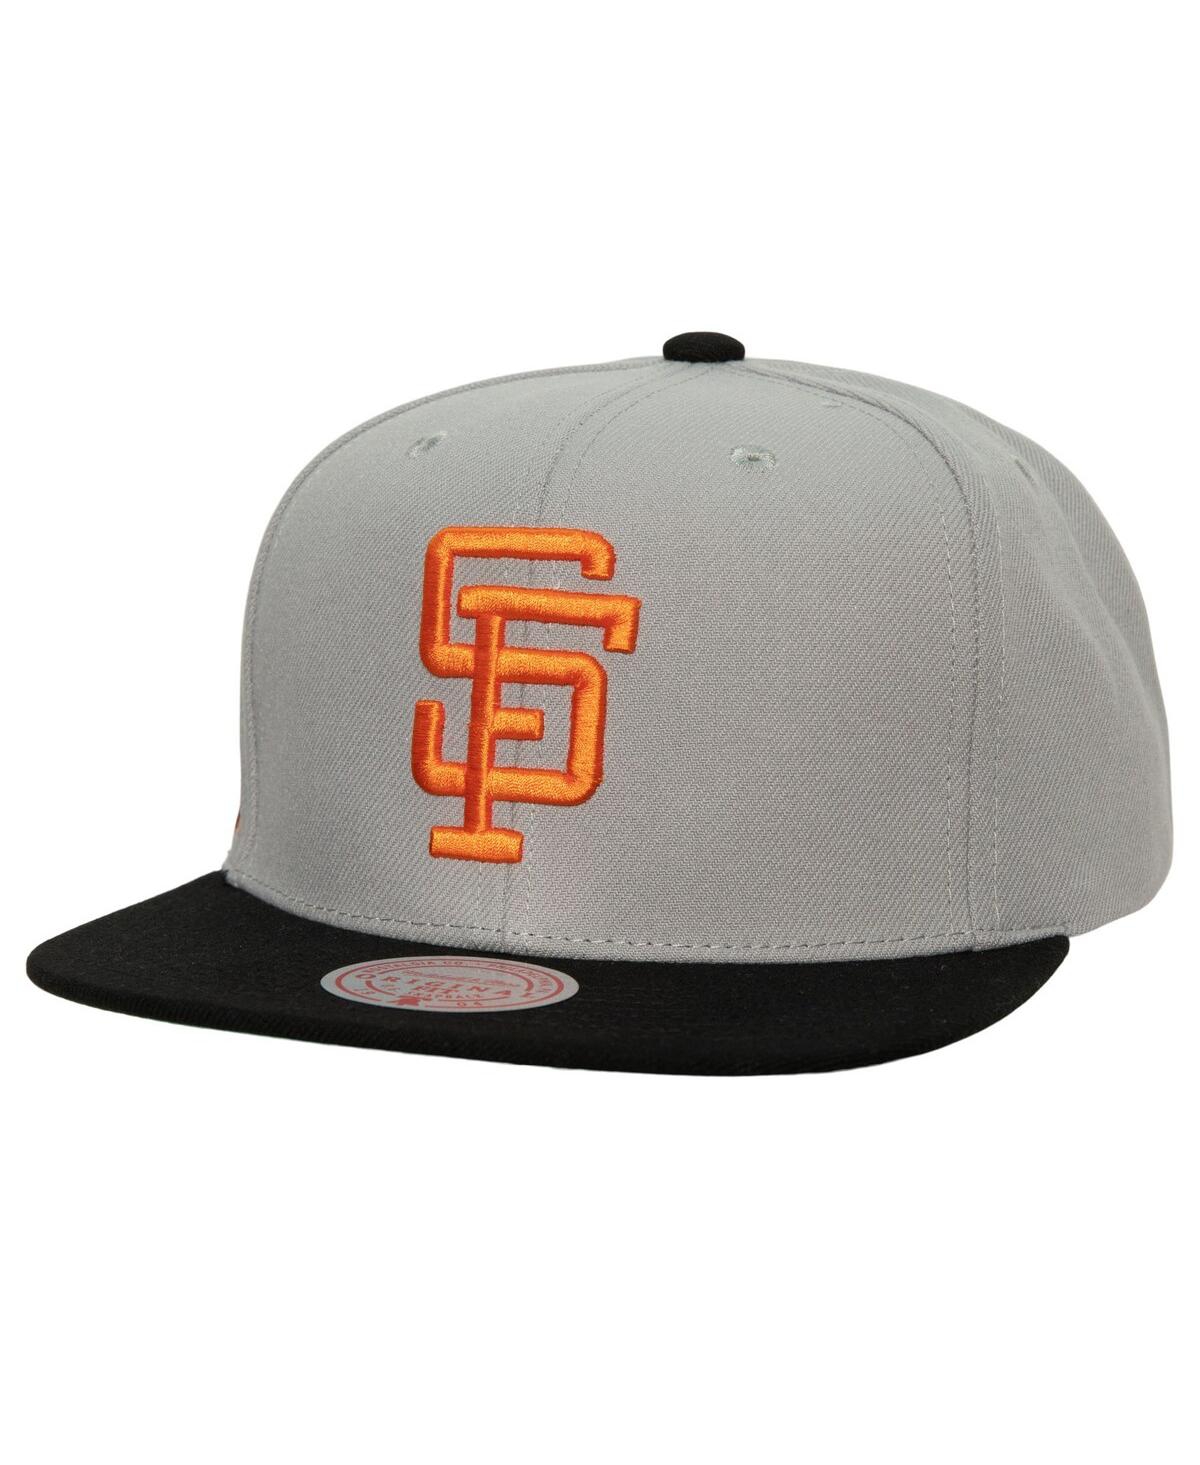 Shop Mitchell & Ness Men's  Gray San Francisco Giants Cooperstown Collection Away Snapback Hat